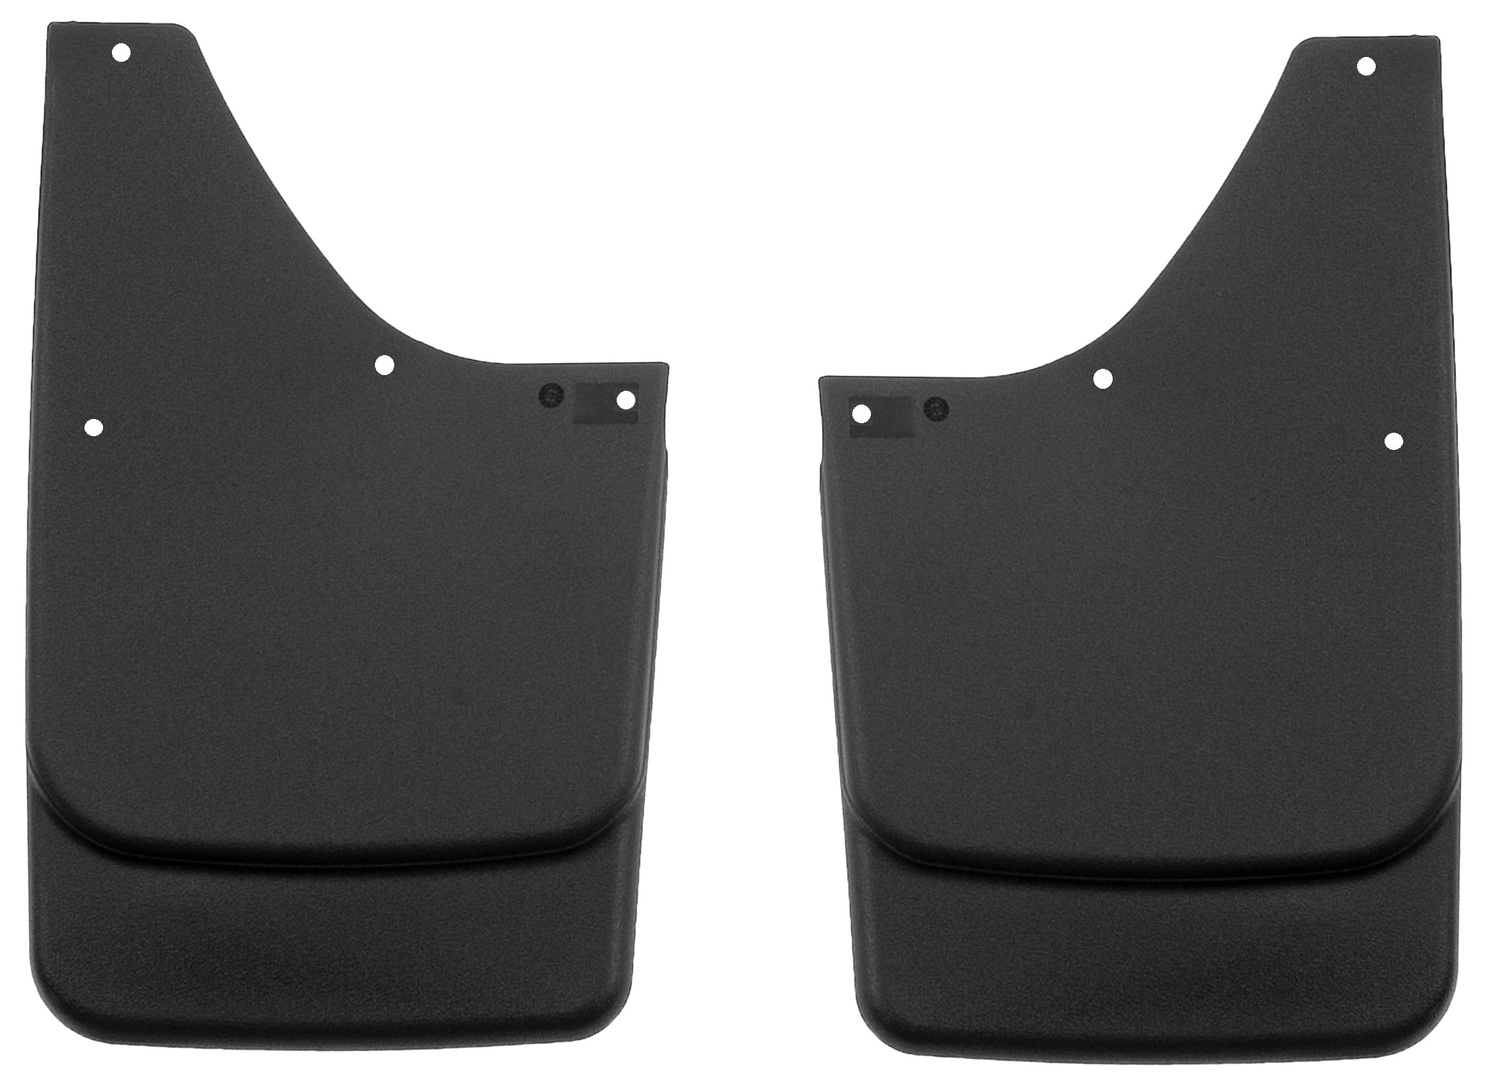 Husky by RealTruck Custom Mud Guards Rear Mud Guards Black Compatible with 97-04 Dodge Dakota Vehicle Has OE Fender Flares Compatible with select: 1998-2003 Dodge Durango - image 1 of 11